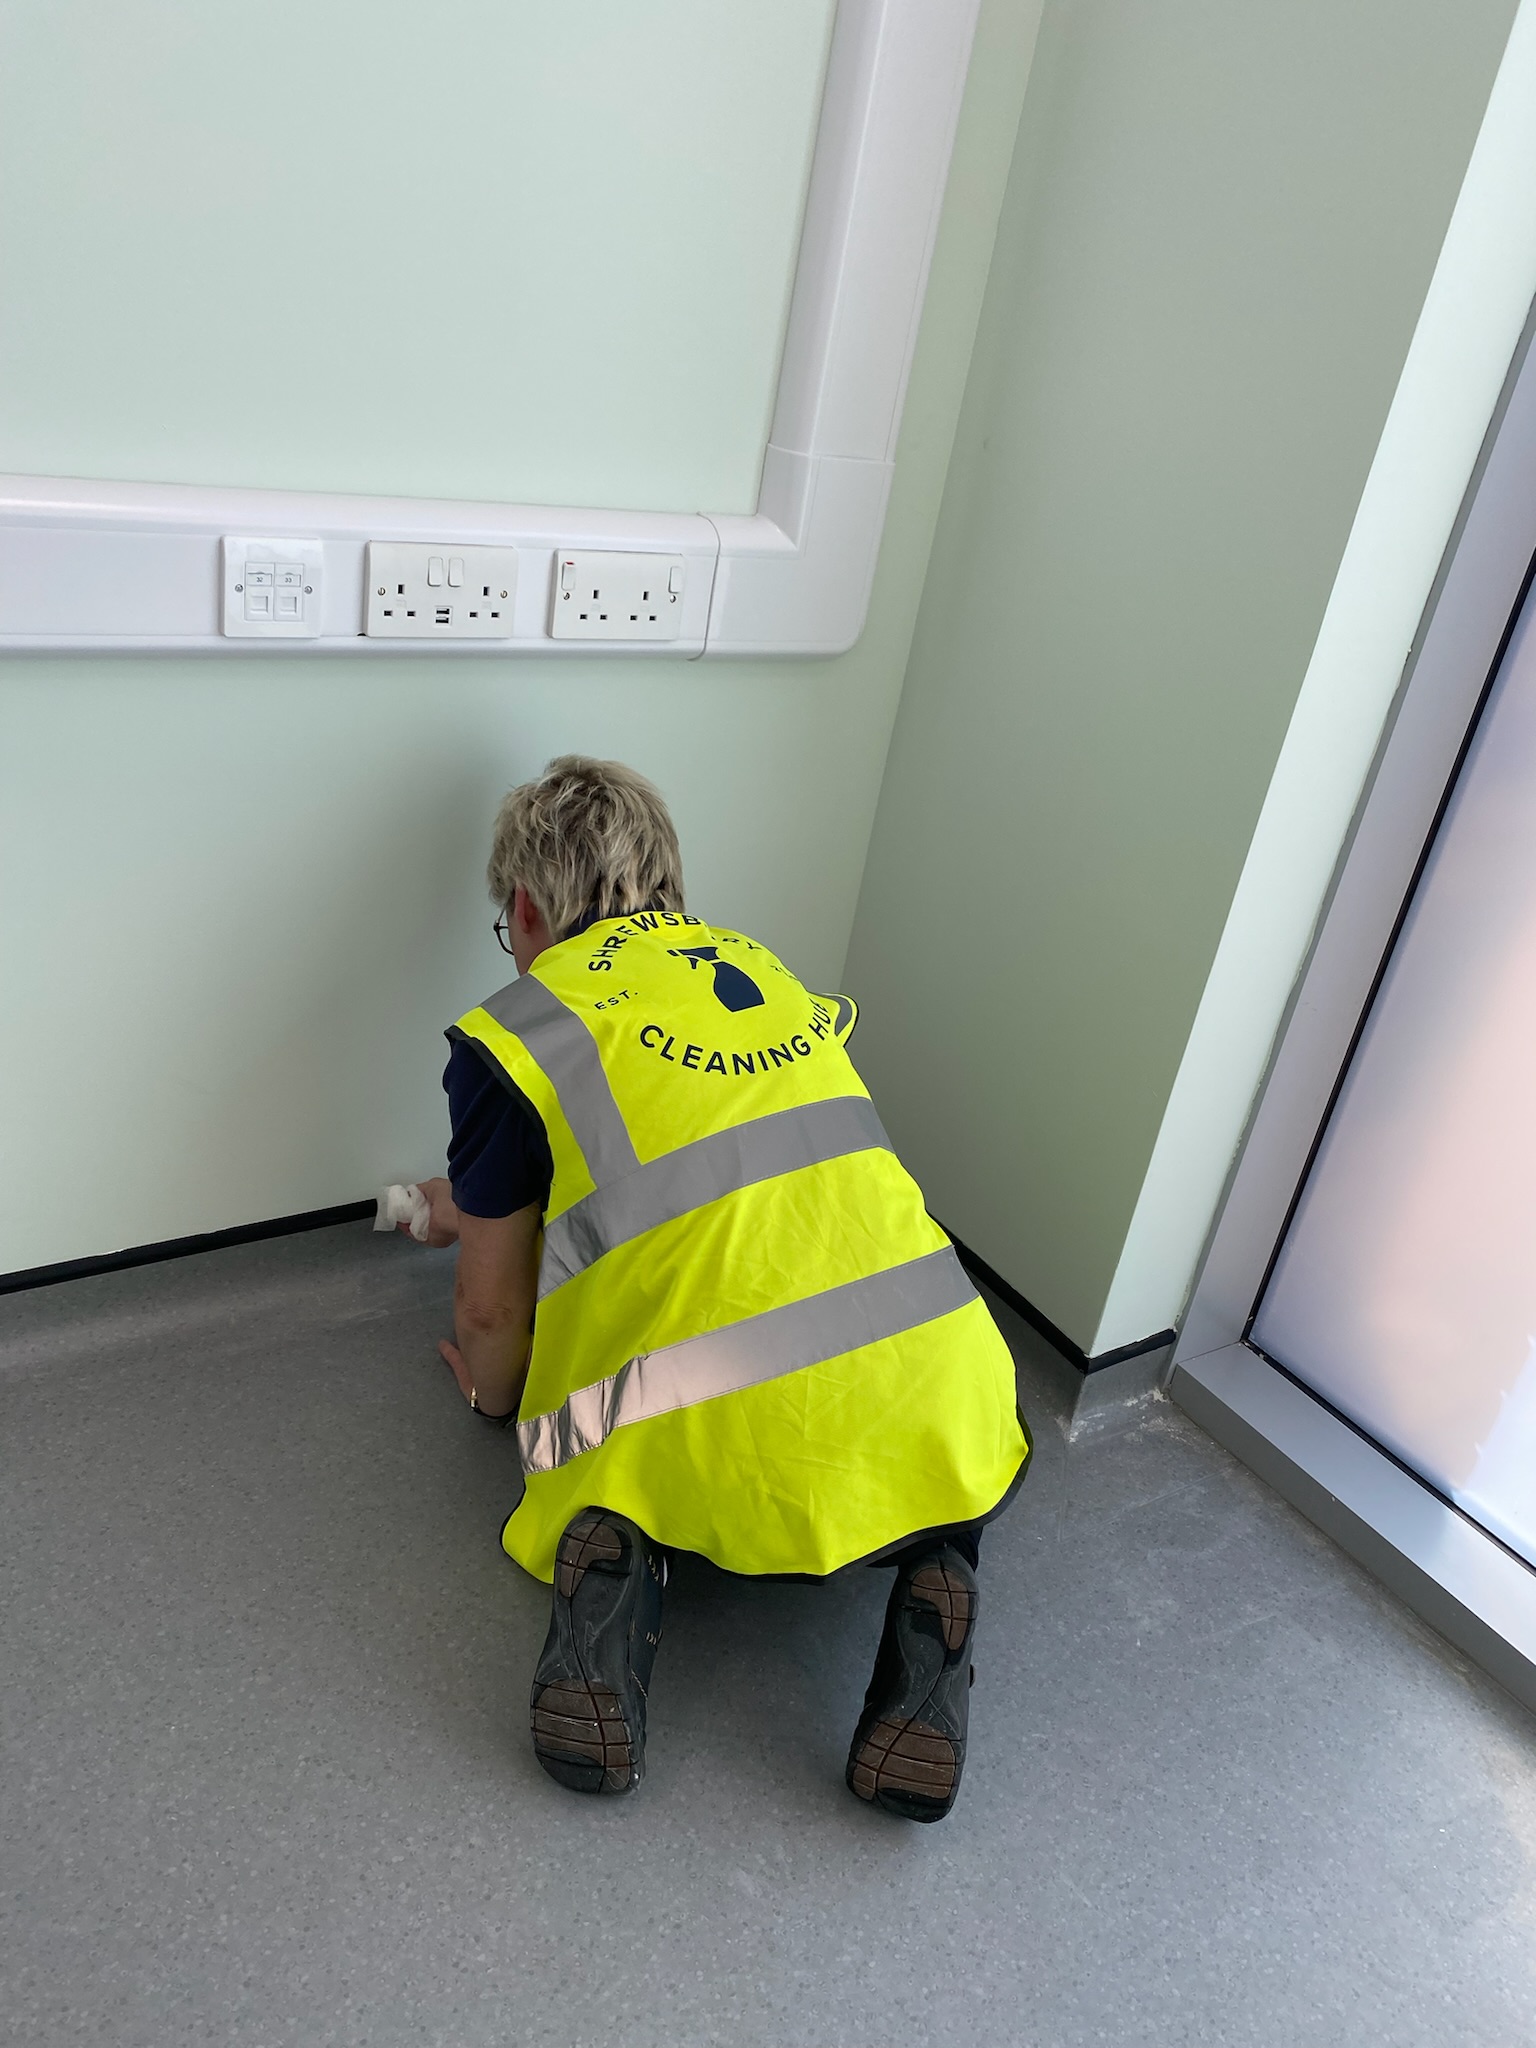 builders cleans using specialised equipment to clean surfaces after construction